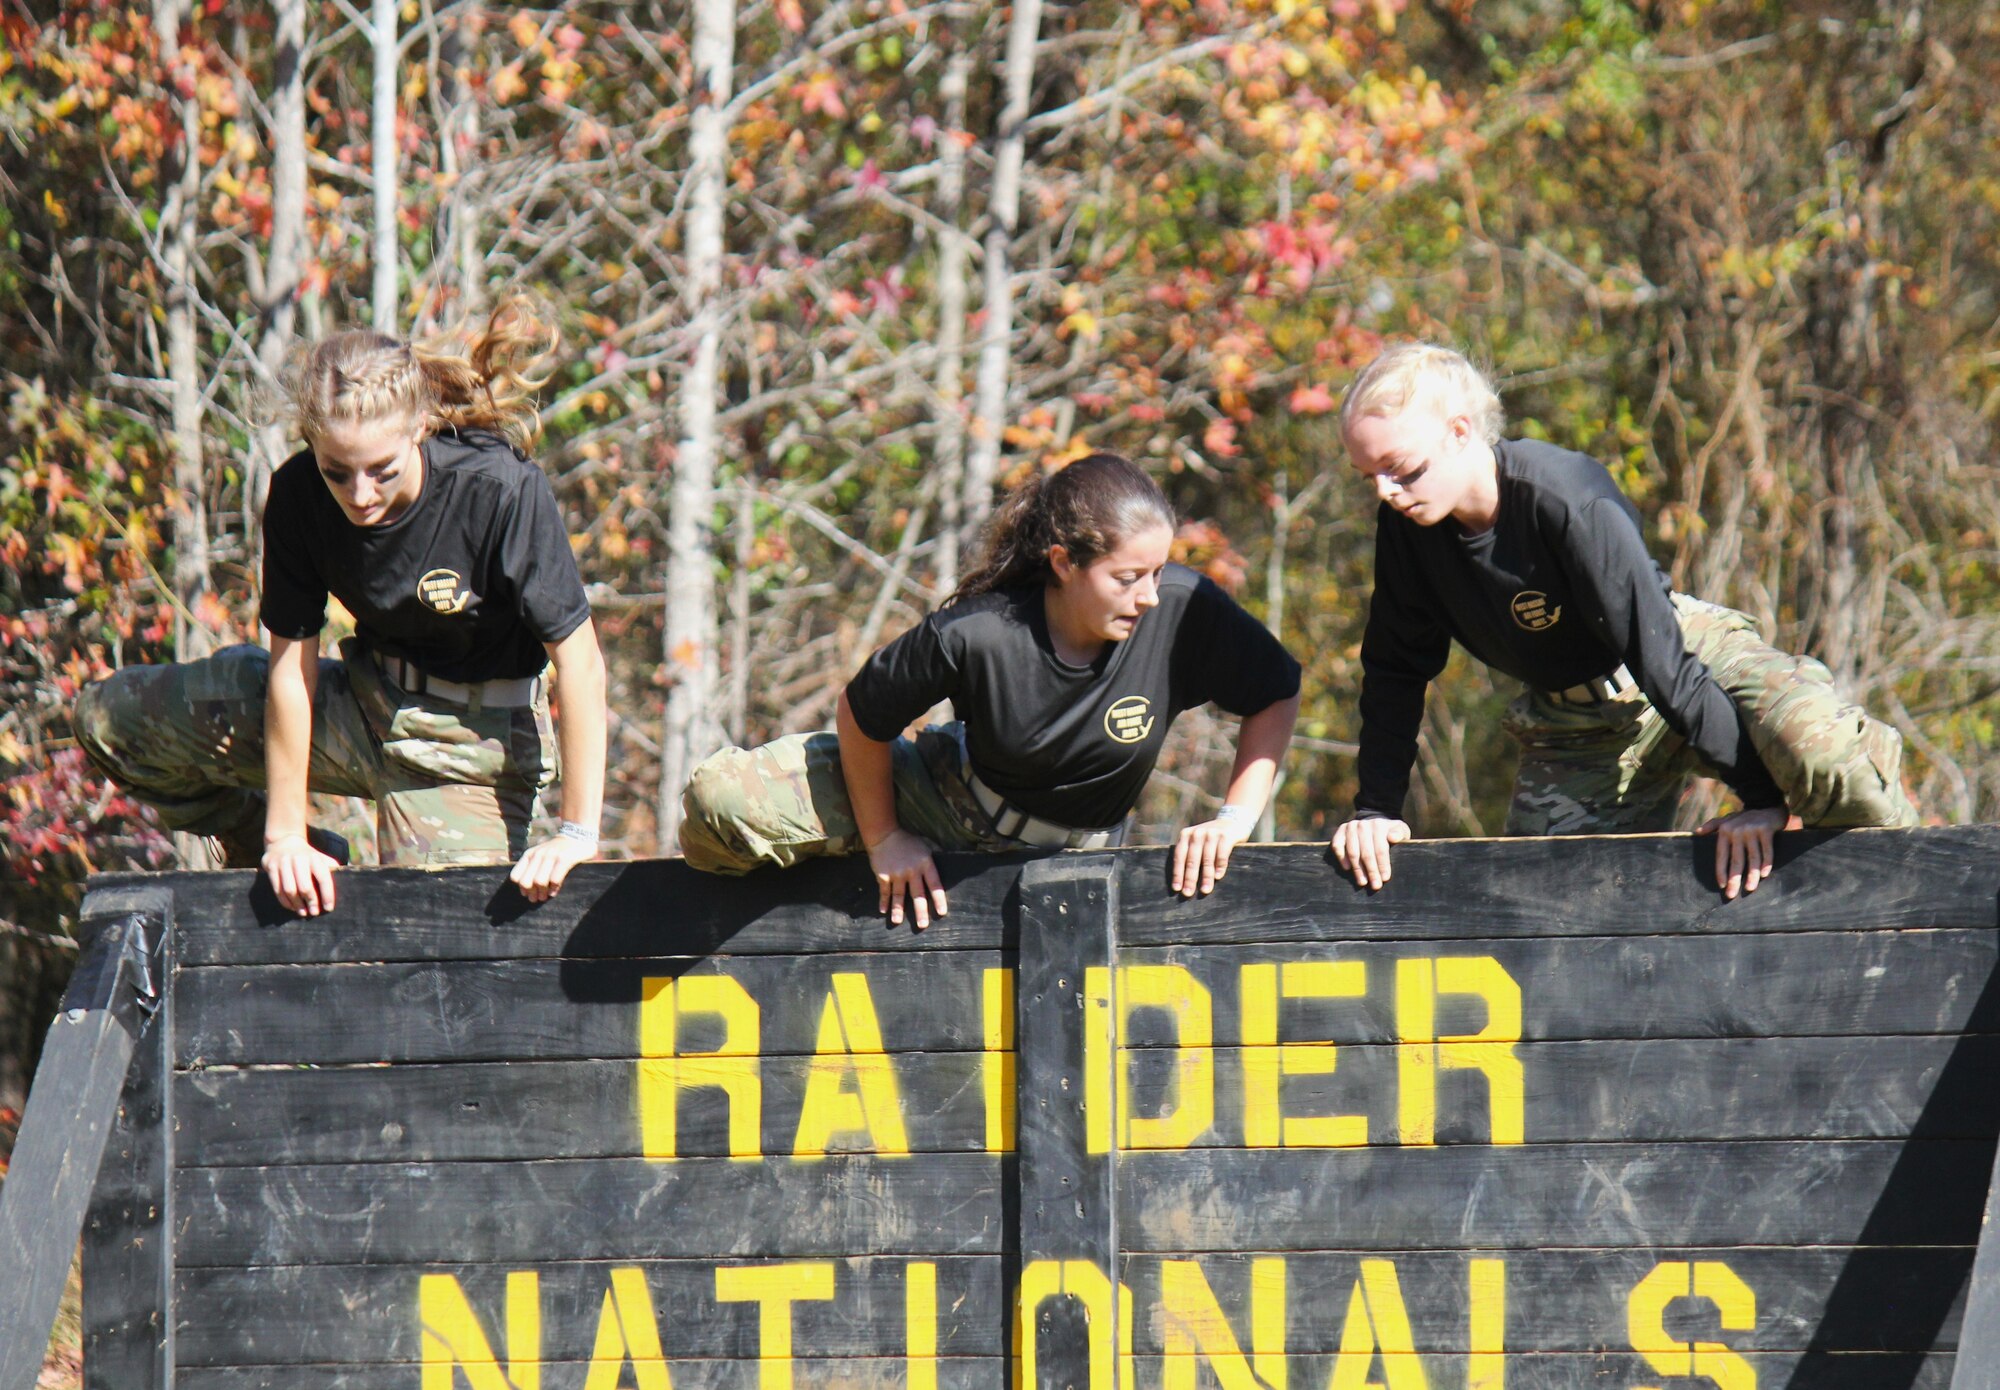 An Air Force Junior ROTC cadet competes in the Rope Bridge event.